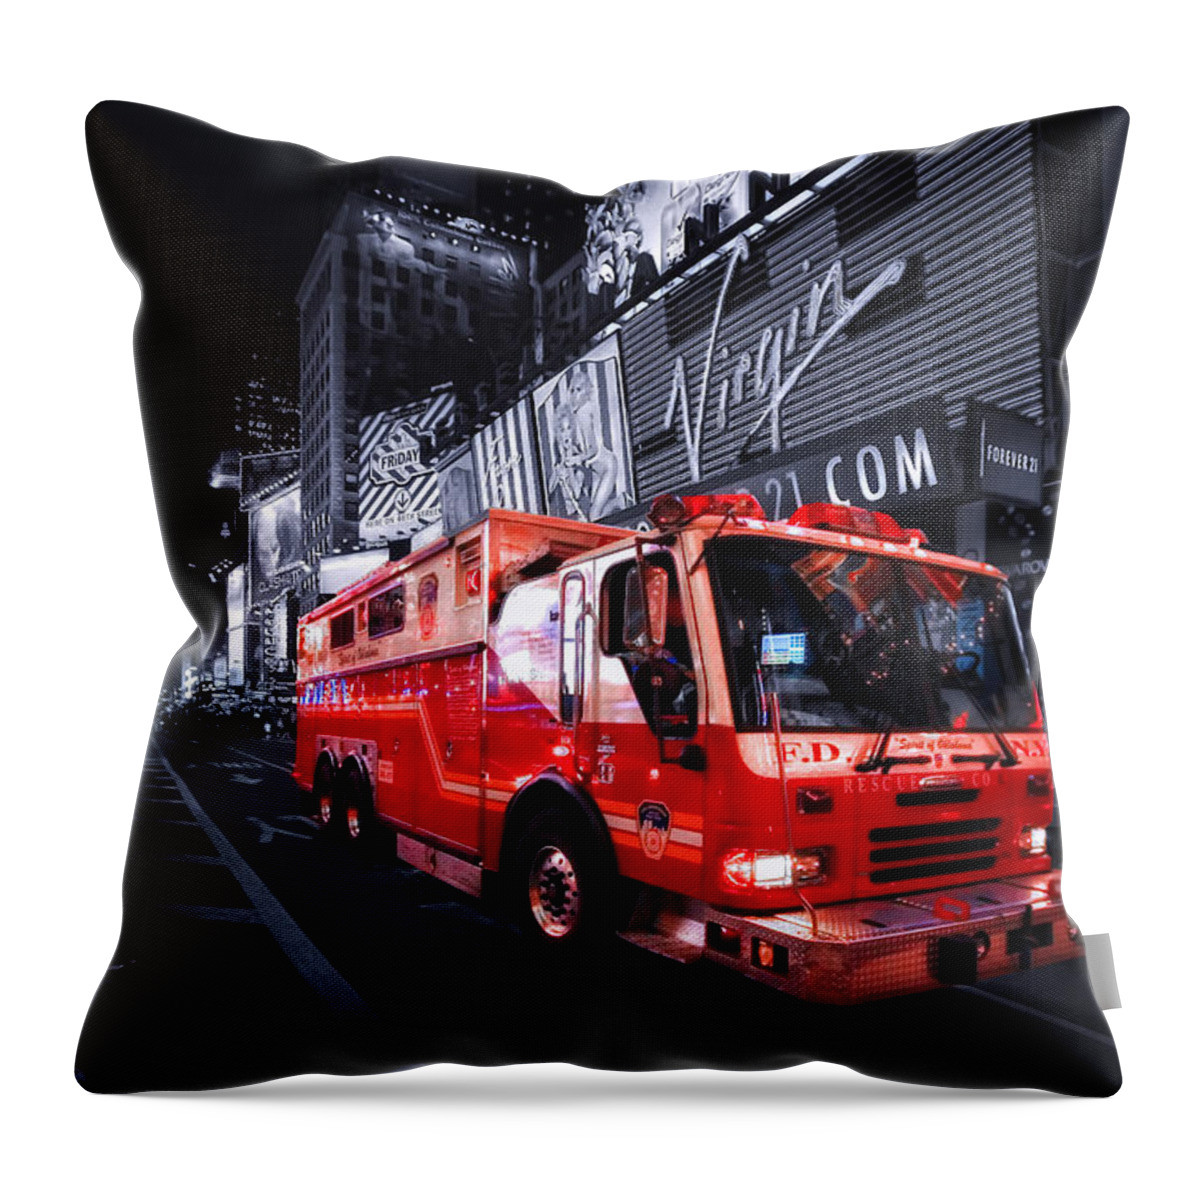 Fire Throw Pillow featuring the photograph Rescue Me by Evelina Kremsdorf